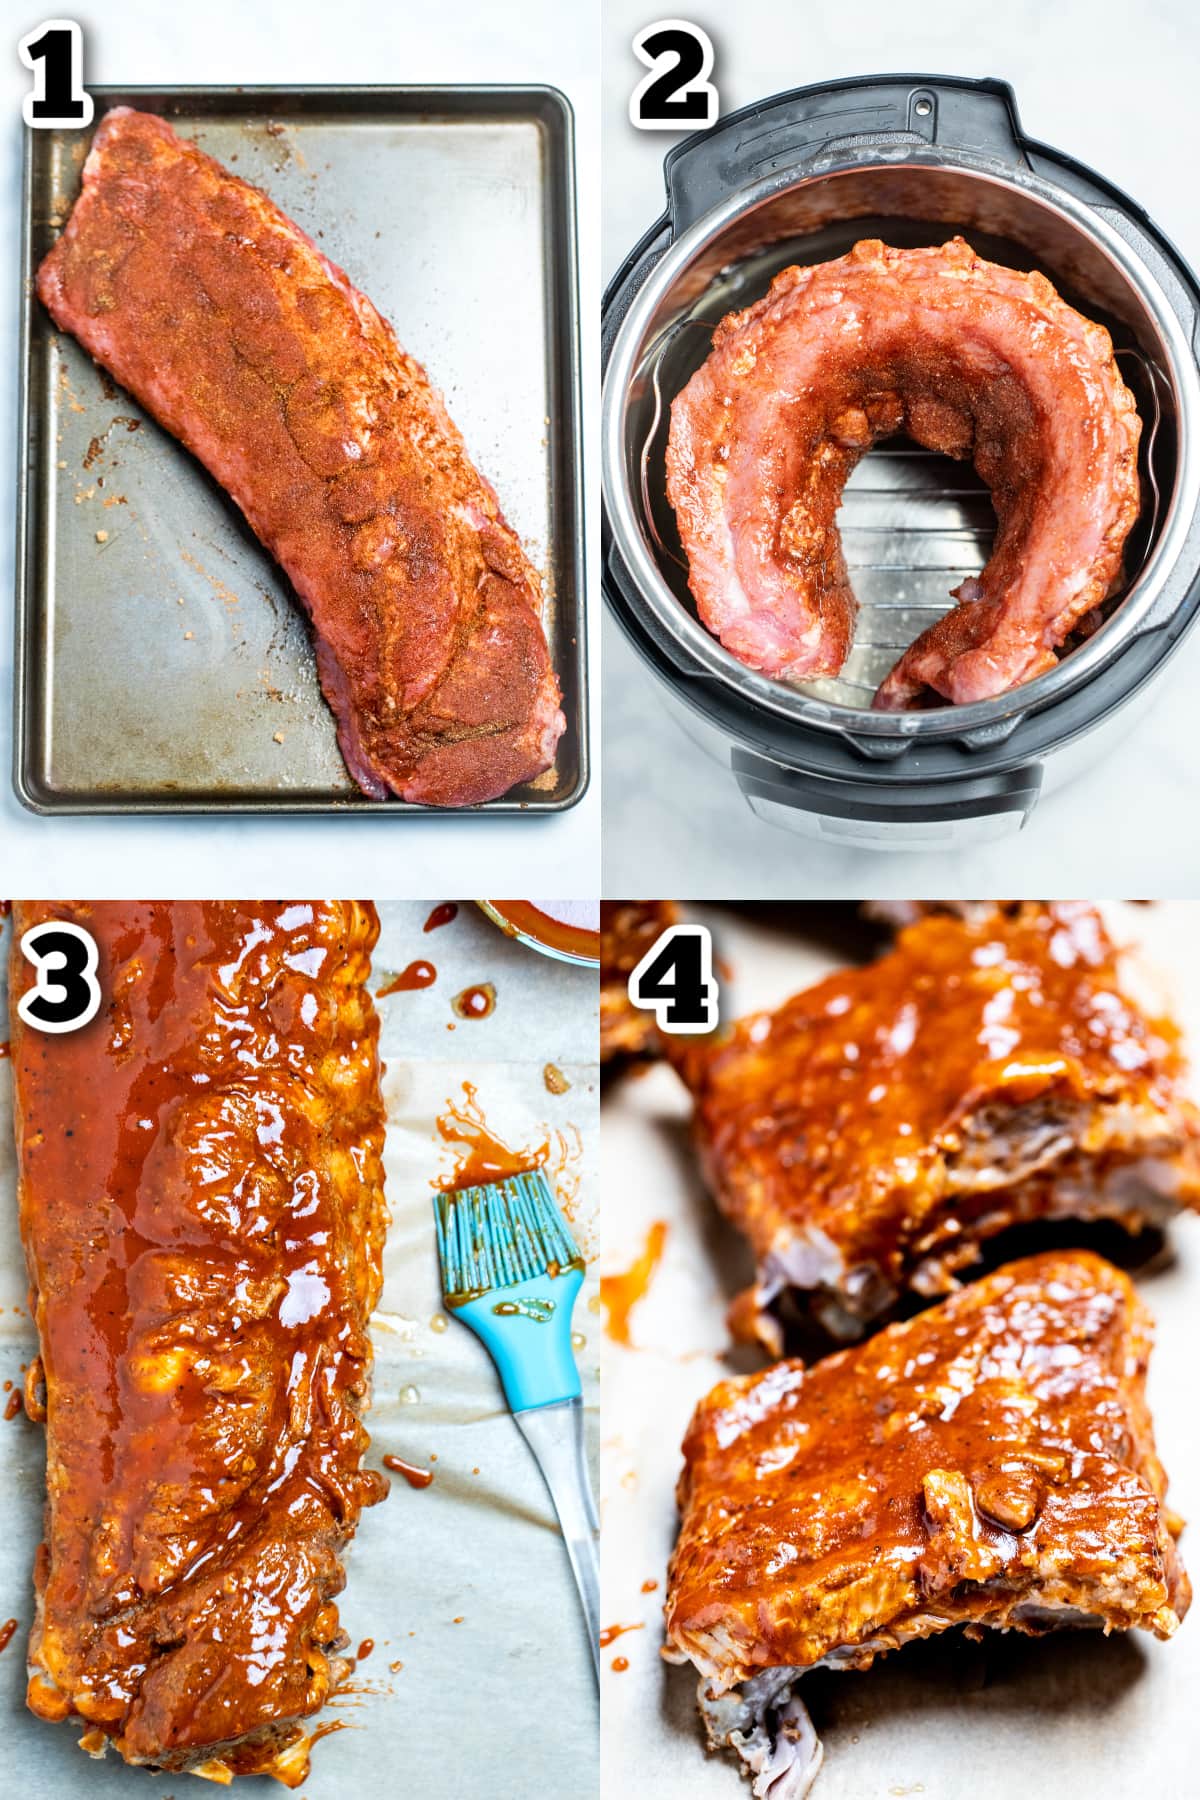 Step by step photos for how to make instant pot pork ribs.